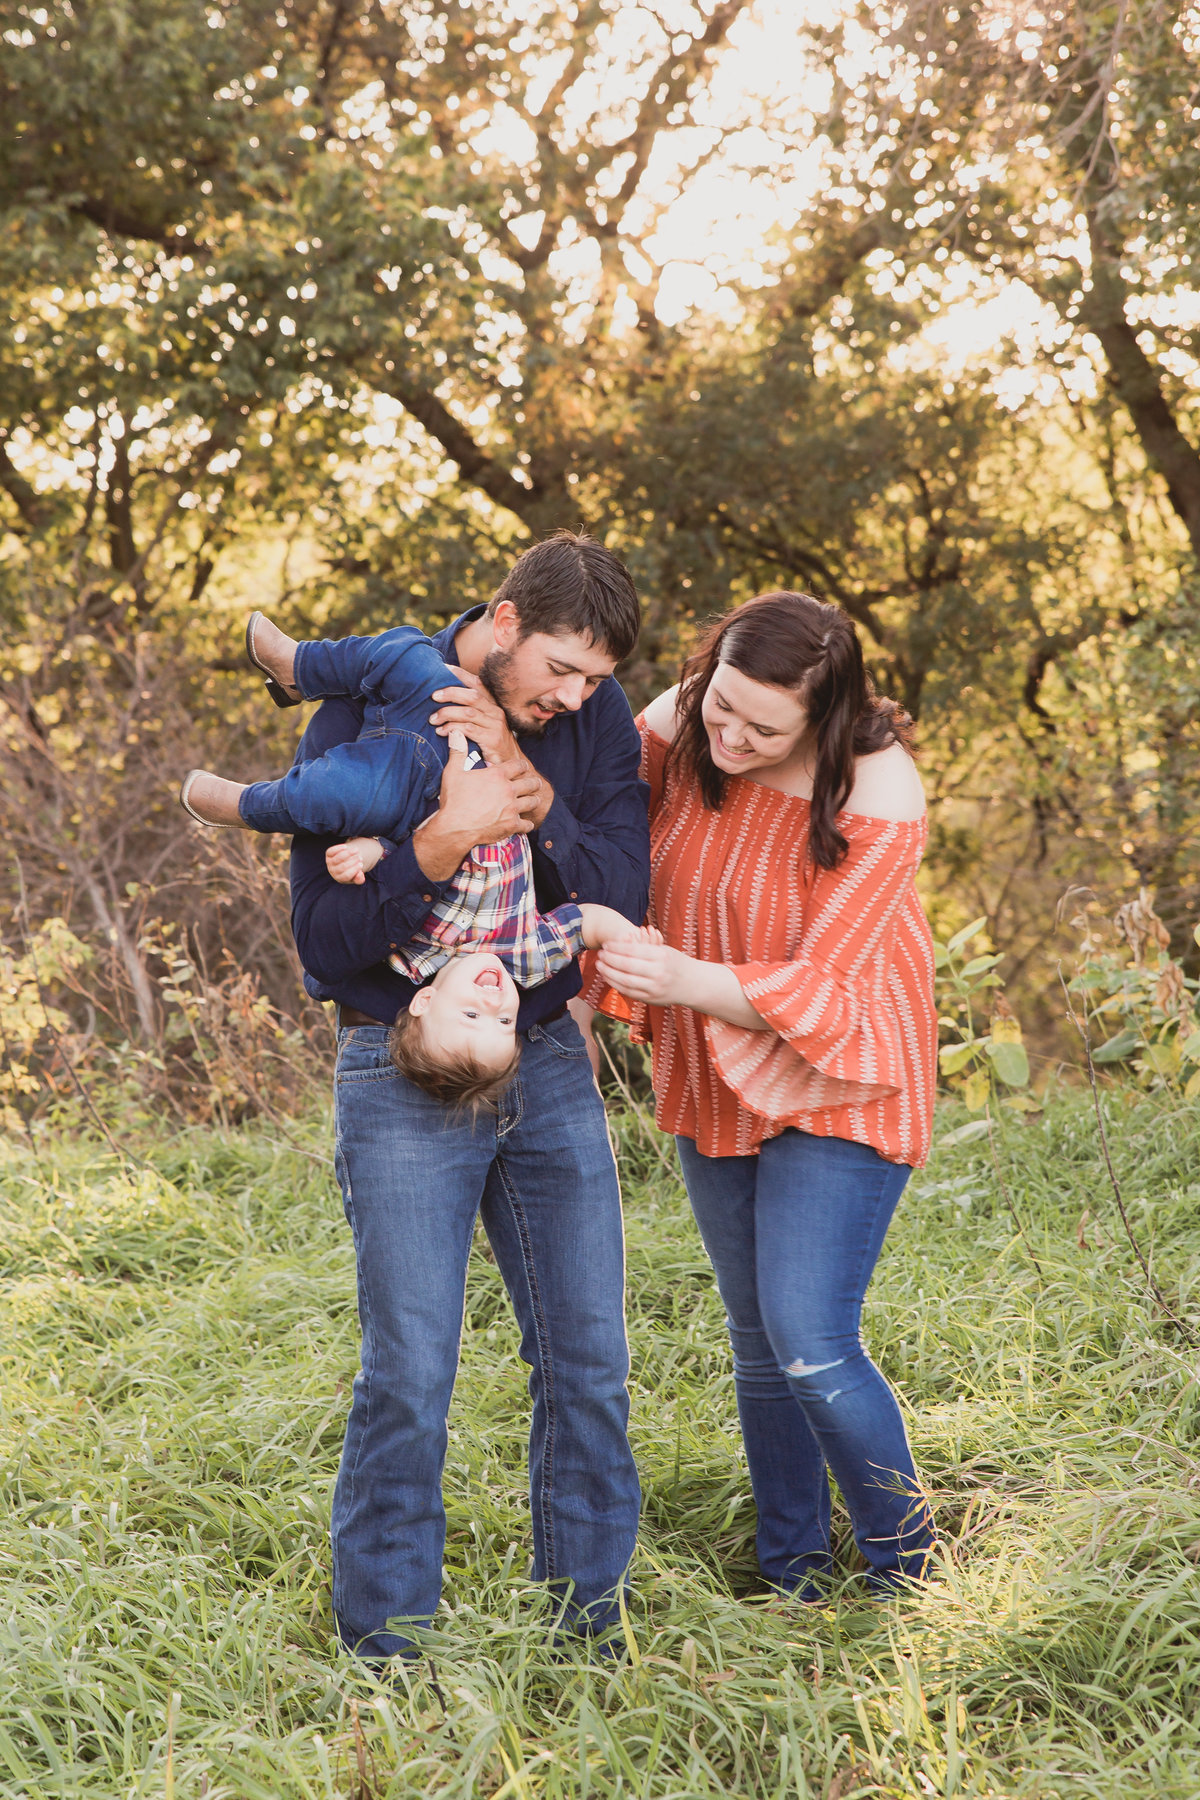 Candid lifestyle family moment playing with baby in fall foliage